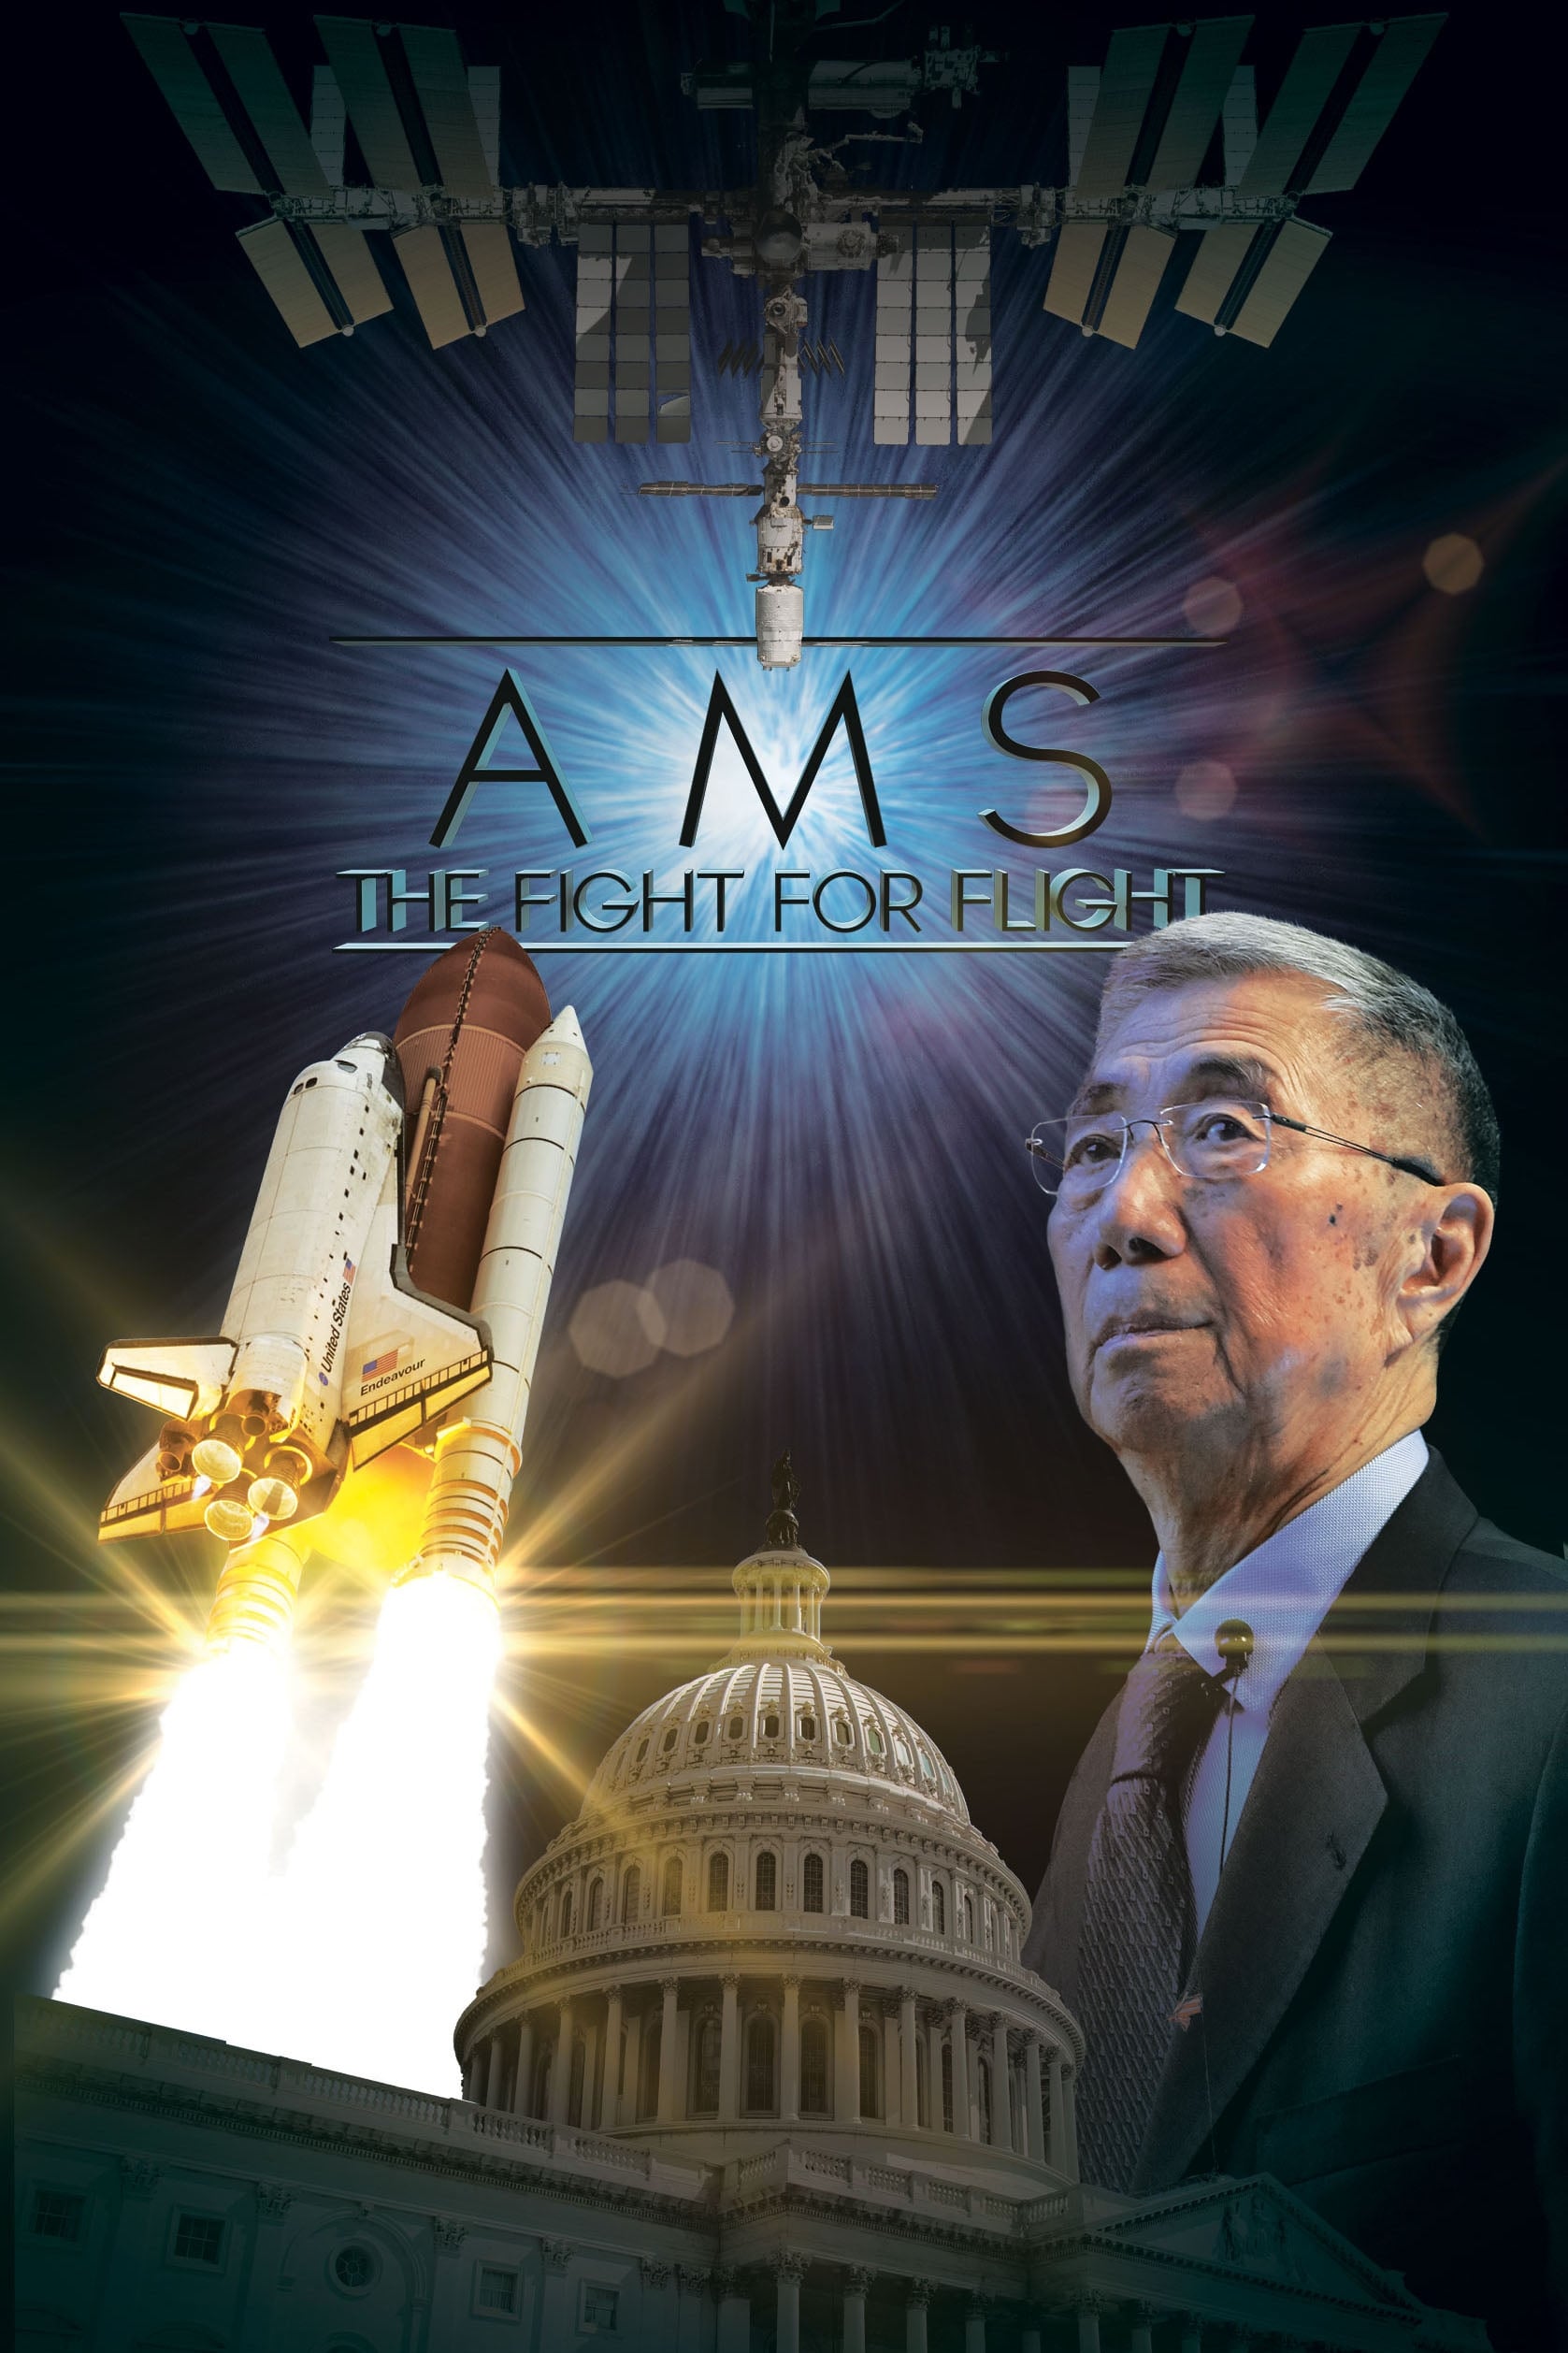 NASA Presents: AMS - The Fight for Flight